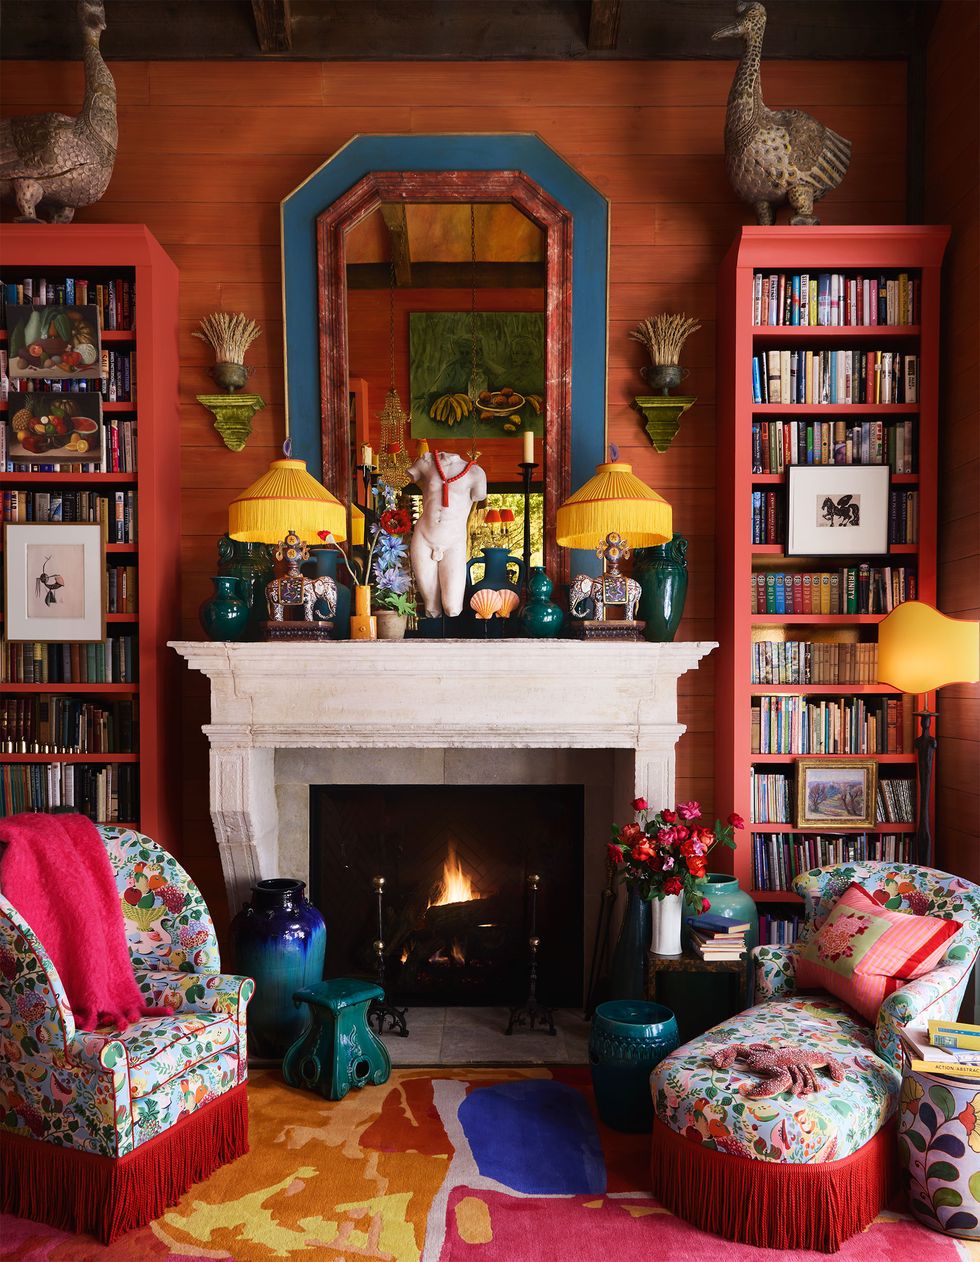 Terracotta colored walls, bookshelves surrounding a fireplace with a mirror, objects and lamps on a mantel, chairs and side tables, a colorful upholstered armchair and chaise longue, a multi-coloured abstract patterned rug